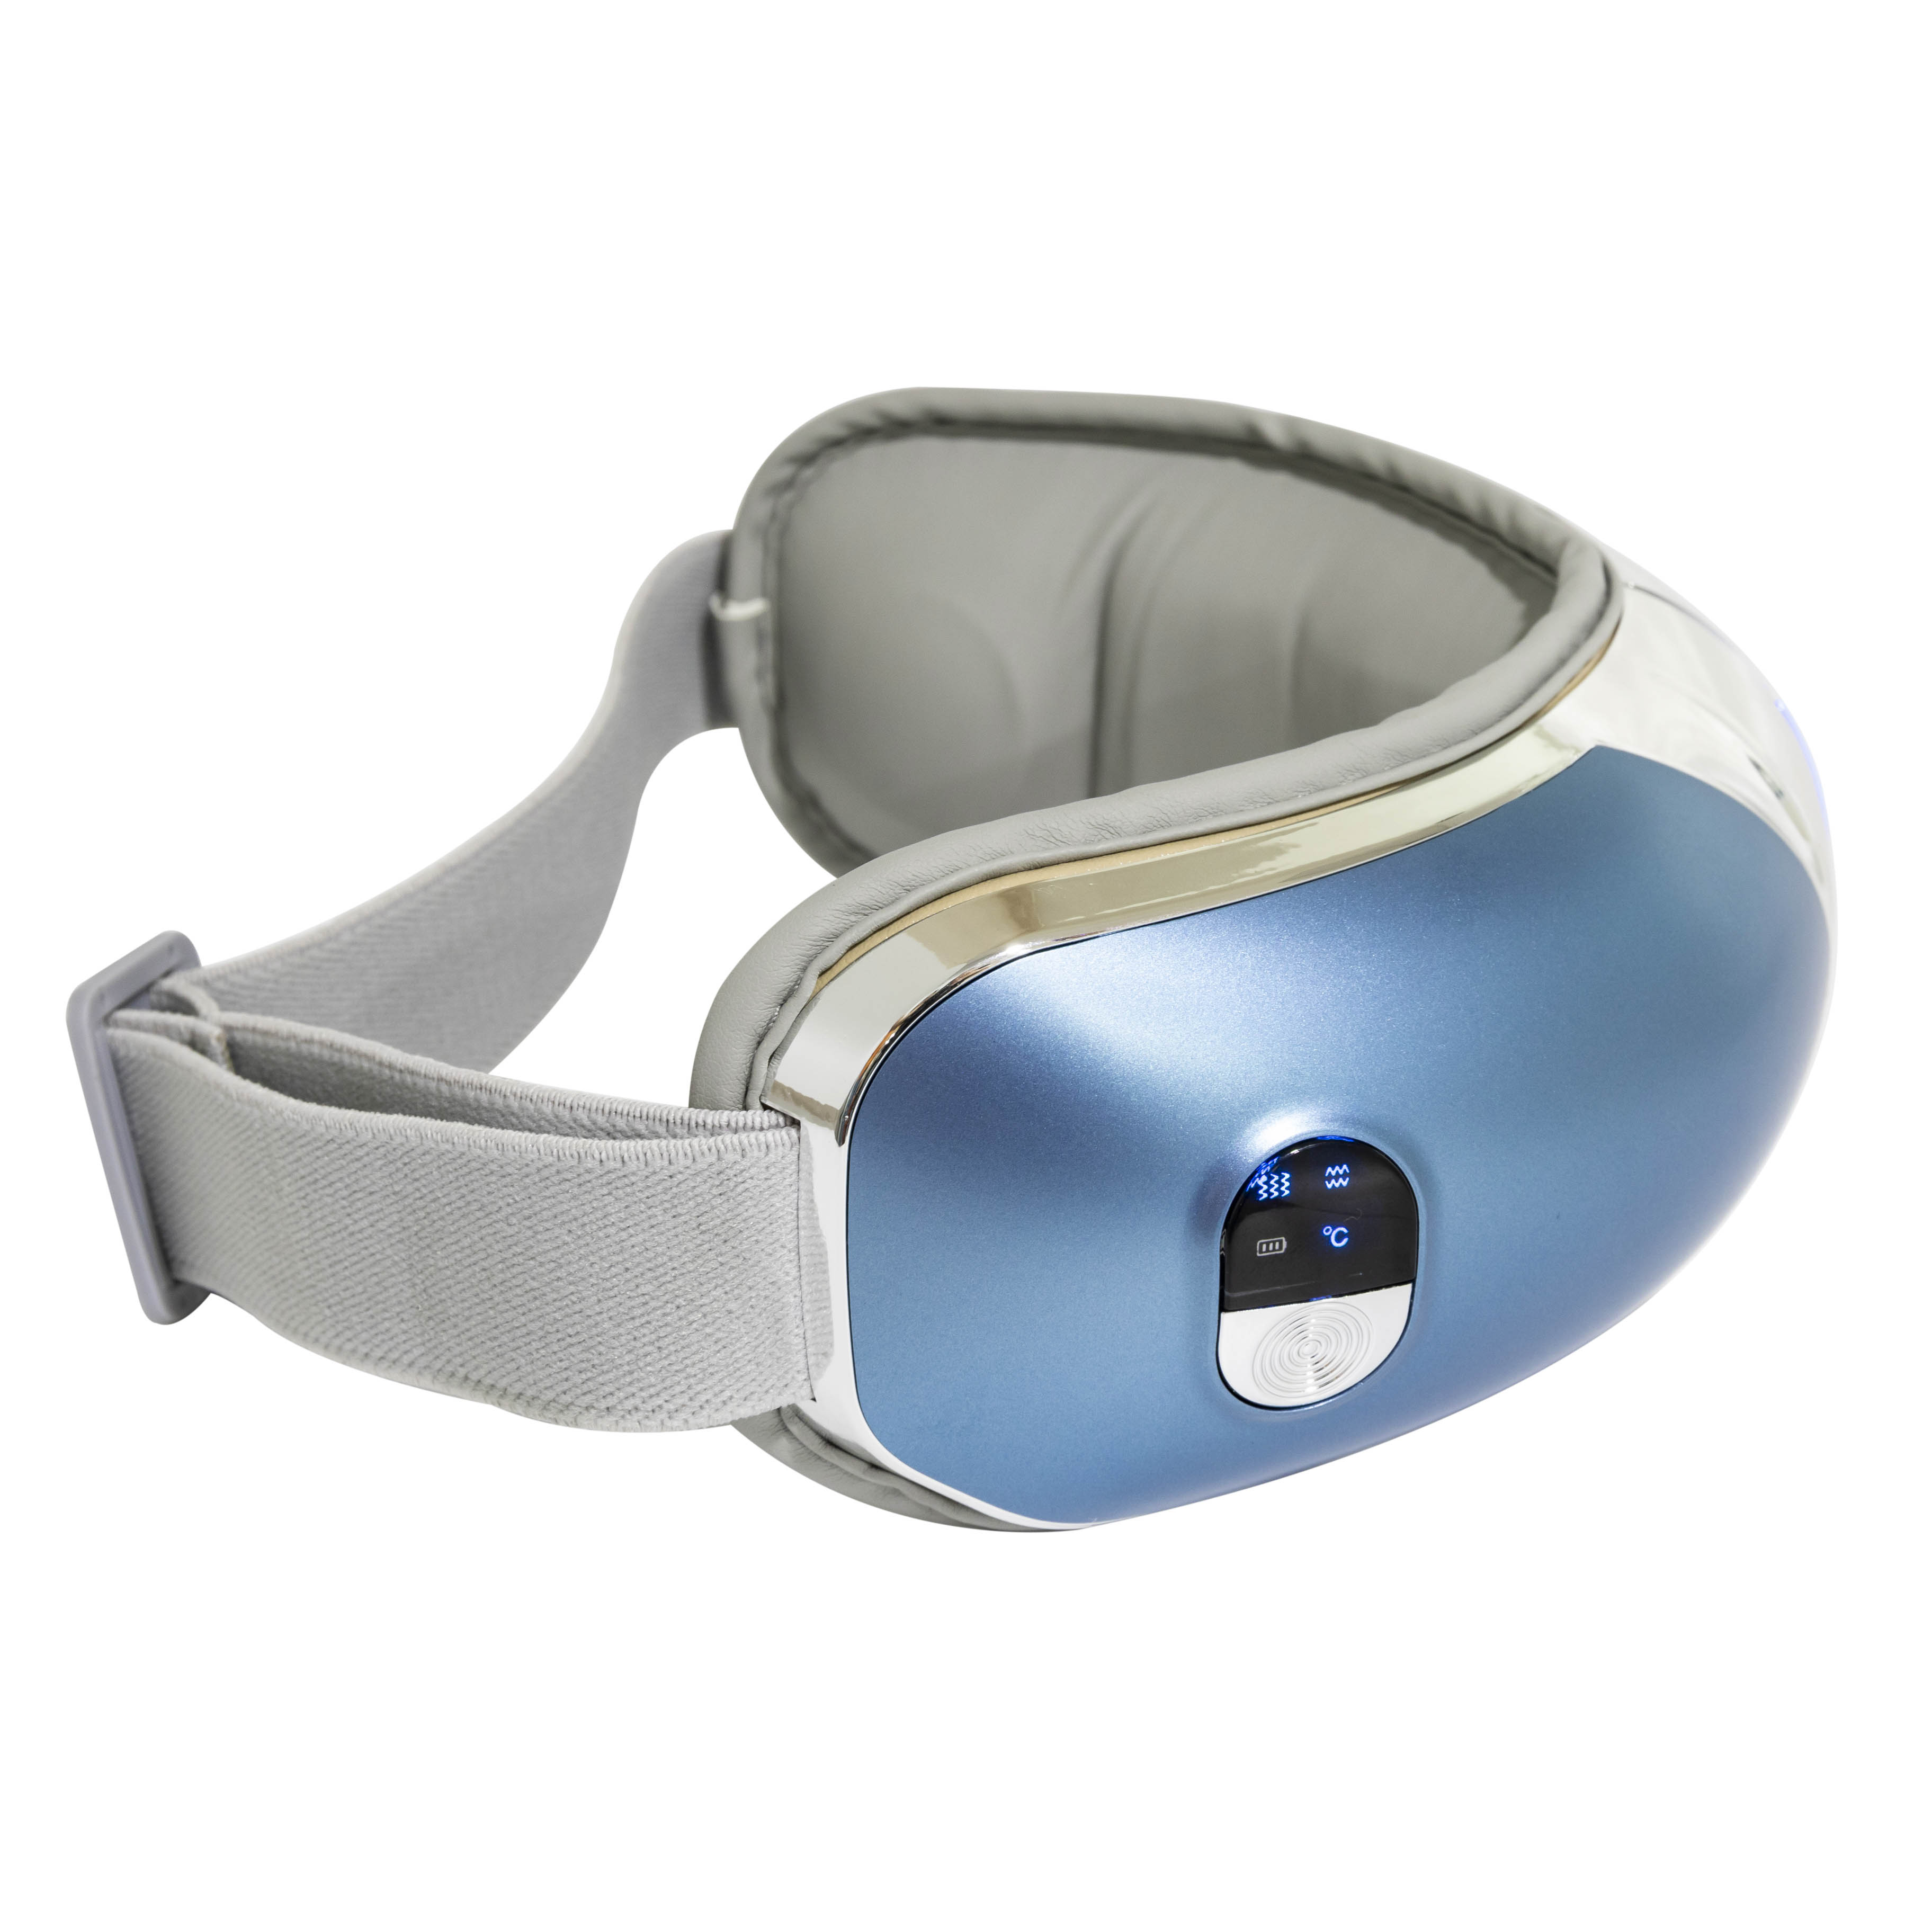 Remote Control Portable Eye Massager For Dry Eyes